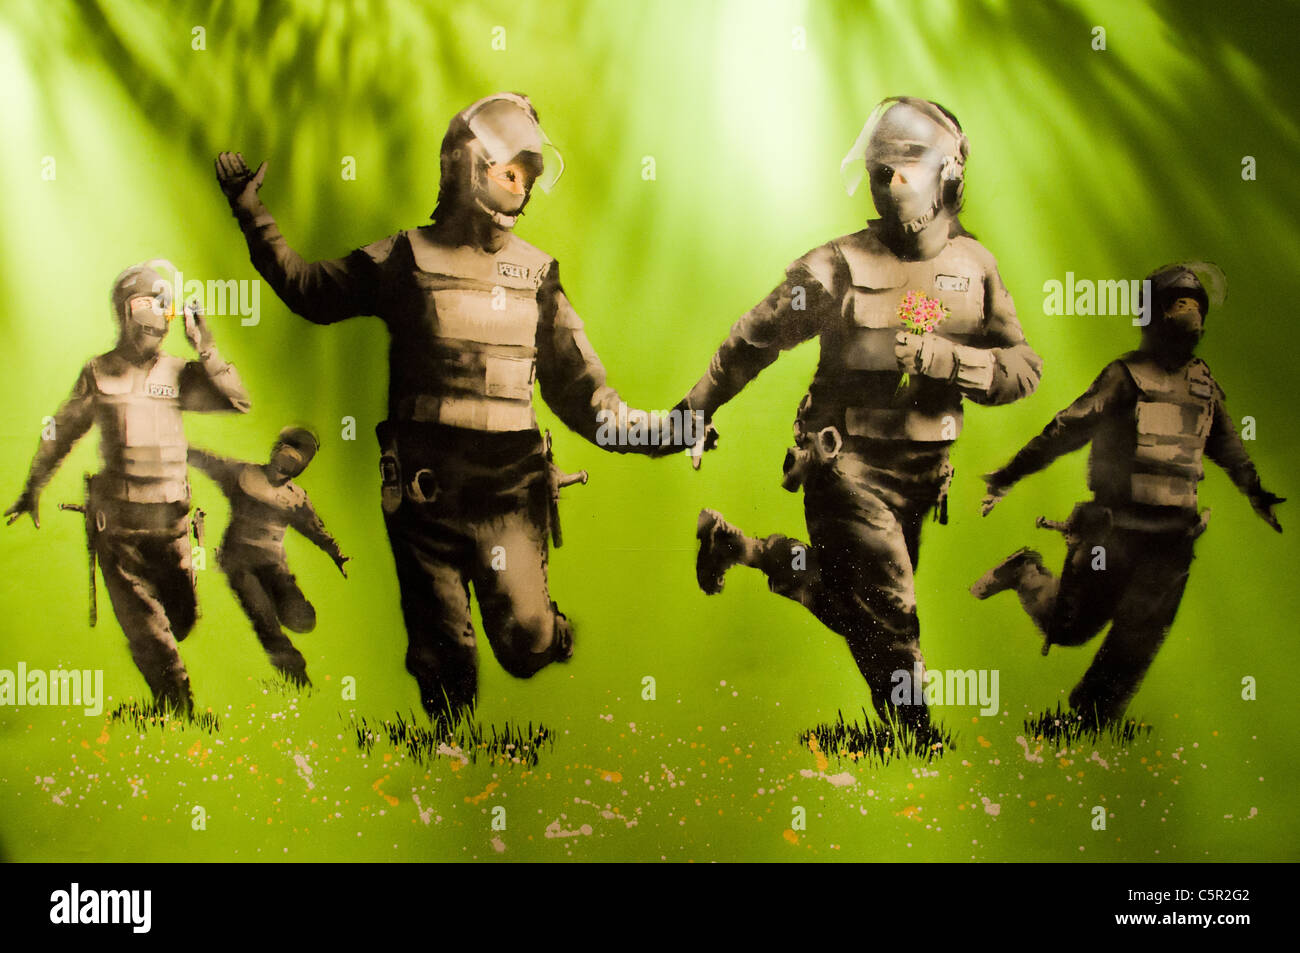 Banksy picture of 5 riot police skipping through daisies holding hands Stock Photo